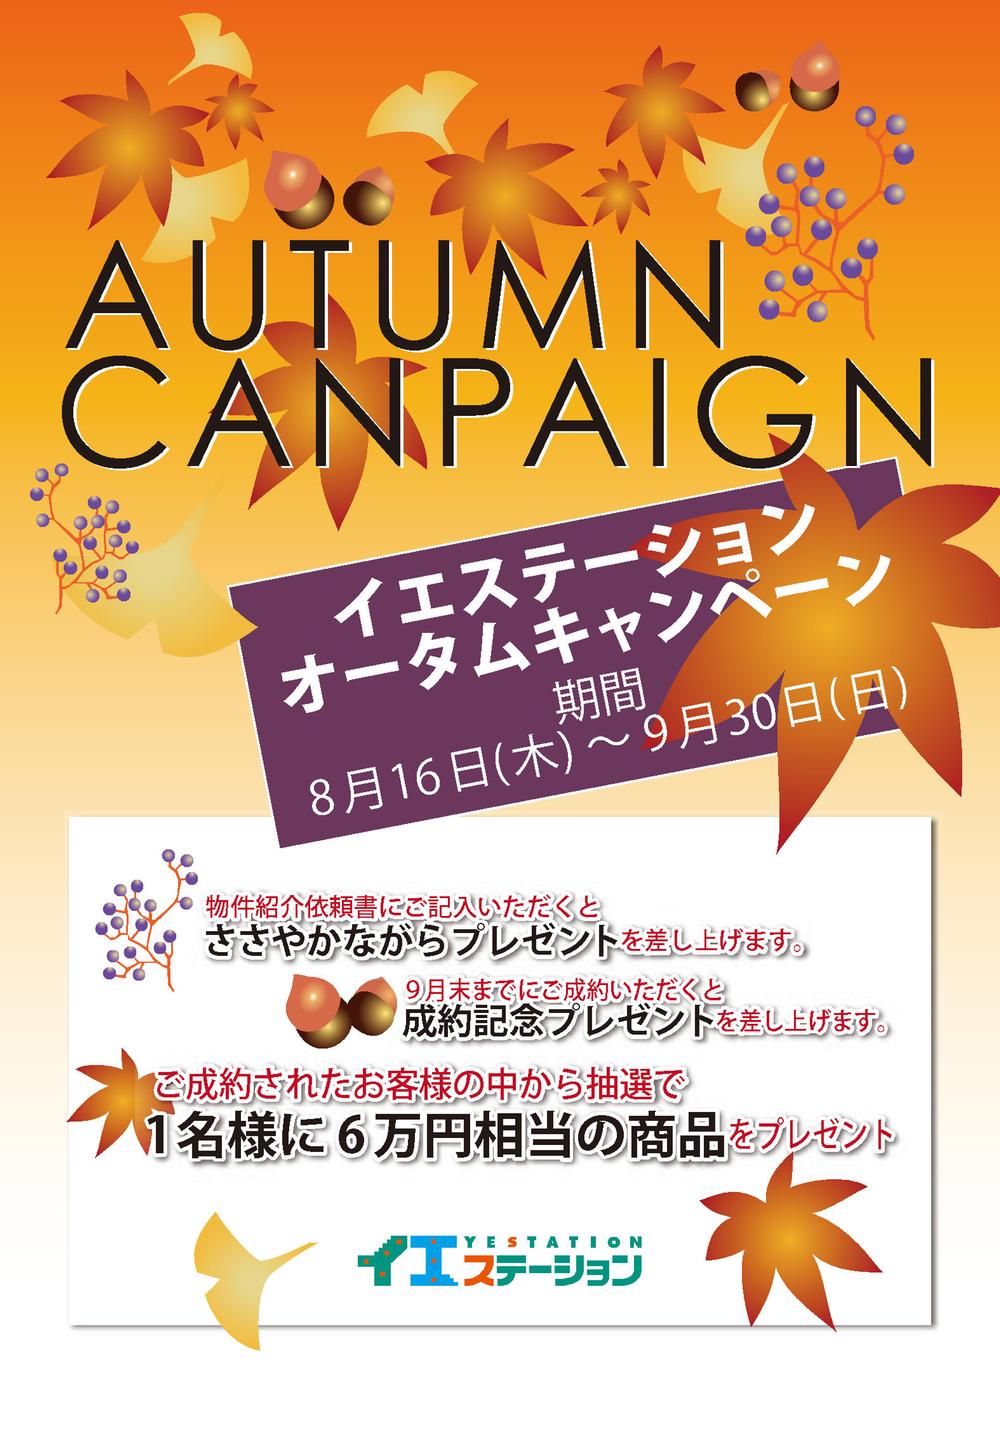 Present. Autumn Campaign (August 16, 2012 ~ Visit us on September 30, 2009) the Company, If you will please register will receive a 1,000 yen gift certificate of. All those who enjoy conclusion of a contract before your registration after September 30, to 30,000 yen worth of gift products! ! (Sale price 8 million yen or less and we will be excluded. )further! ! From inside the house station metropolitan area branch 12 companies in one person will present a 60,000 yen worth of goods in the lottery. 